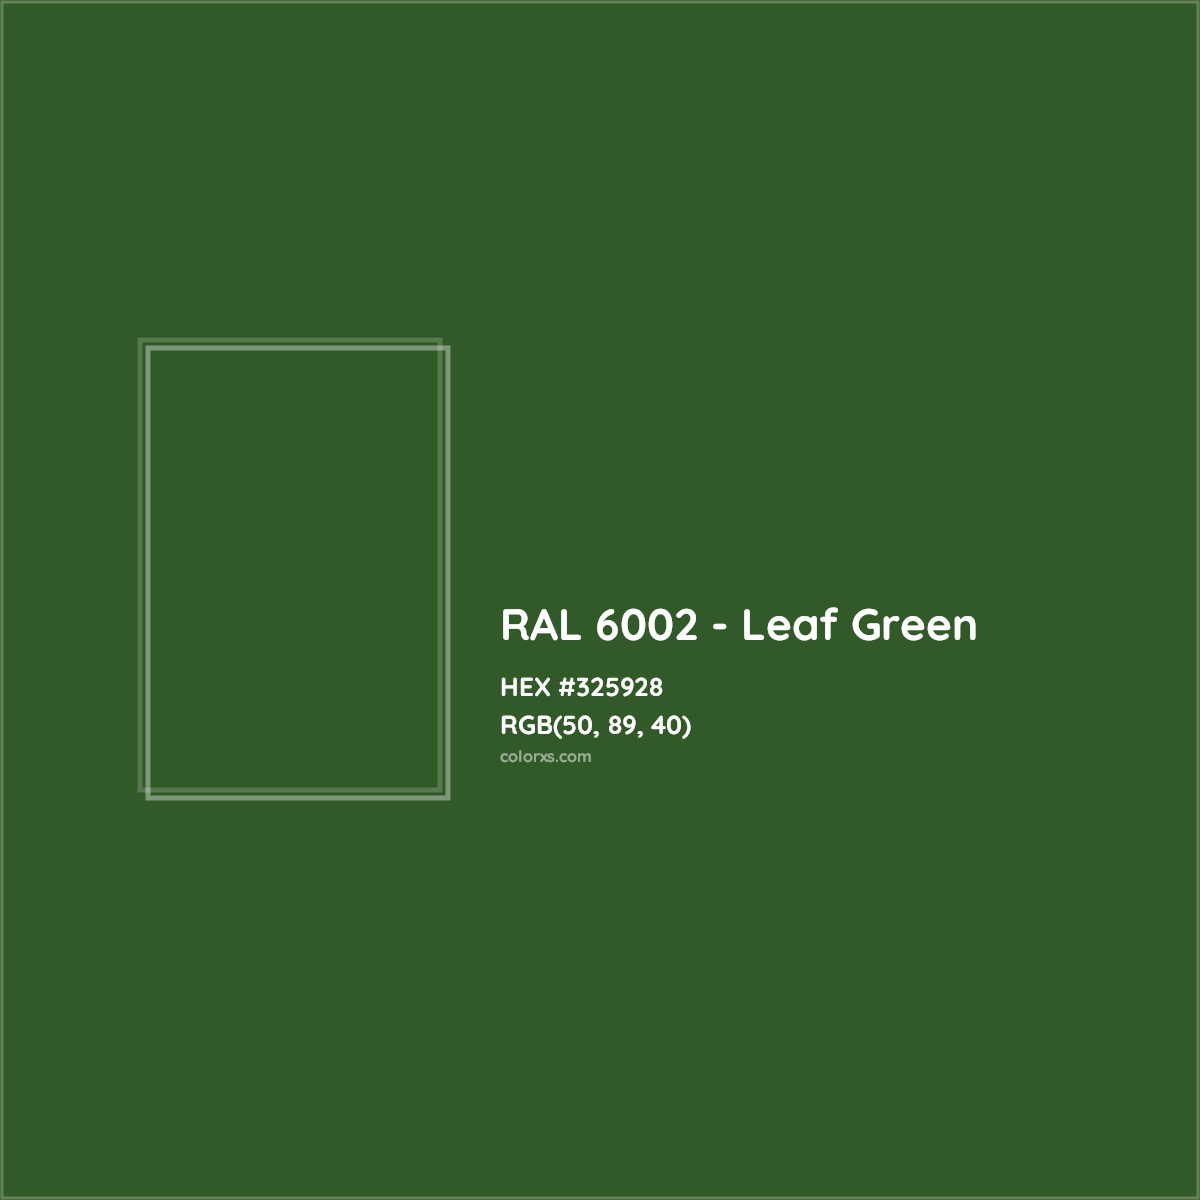 HEX #325928 RAL 6002 - Leaf Green CMS RAL Classic - Color Code